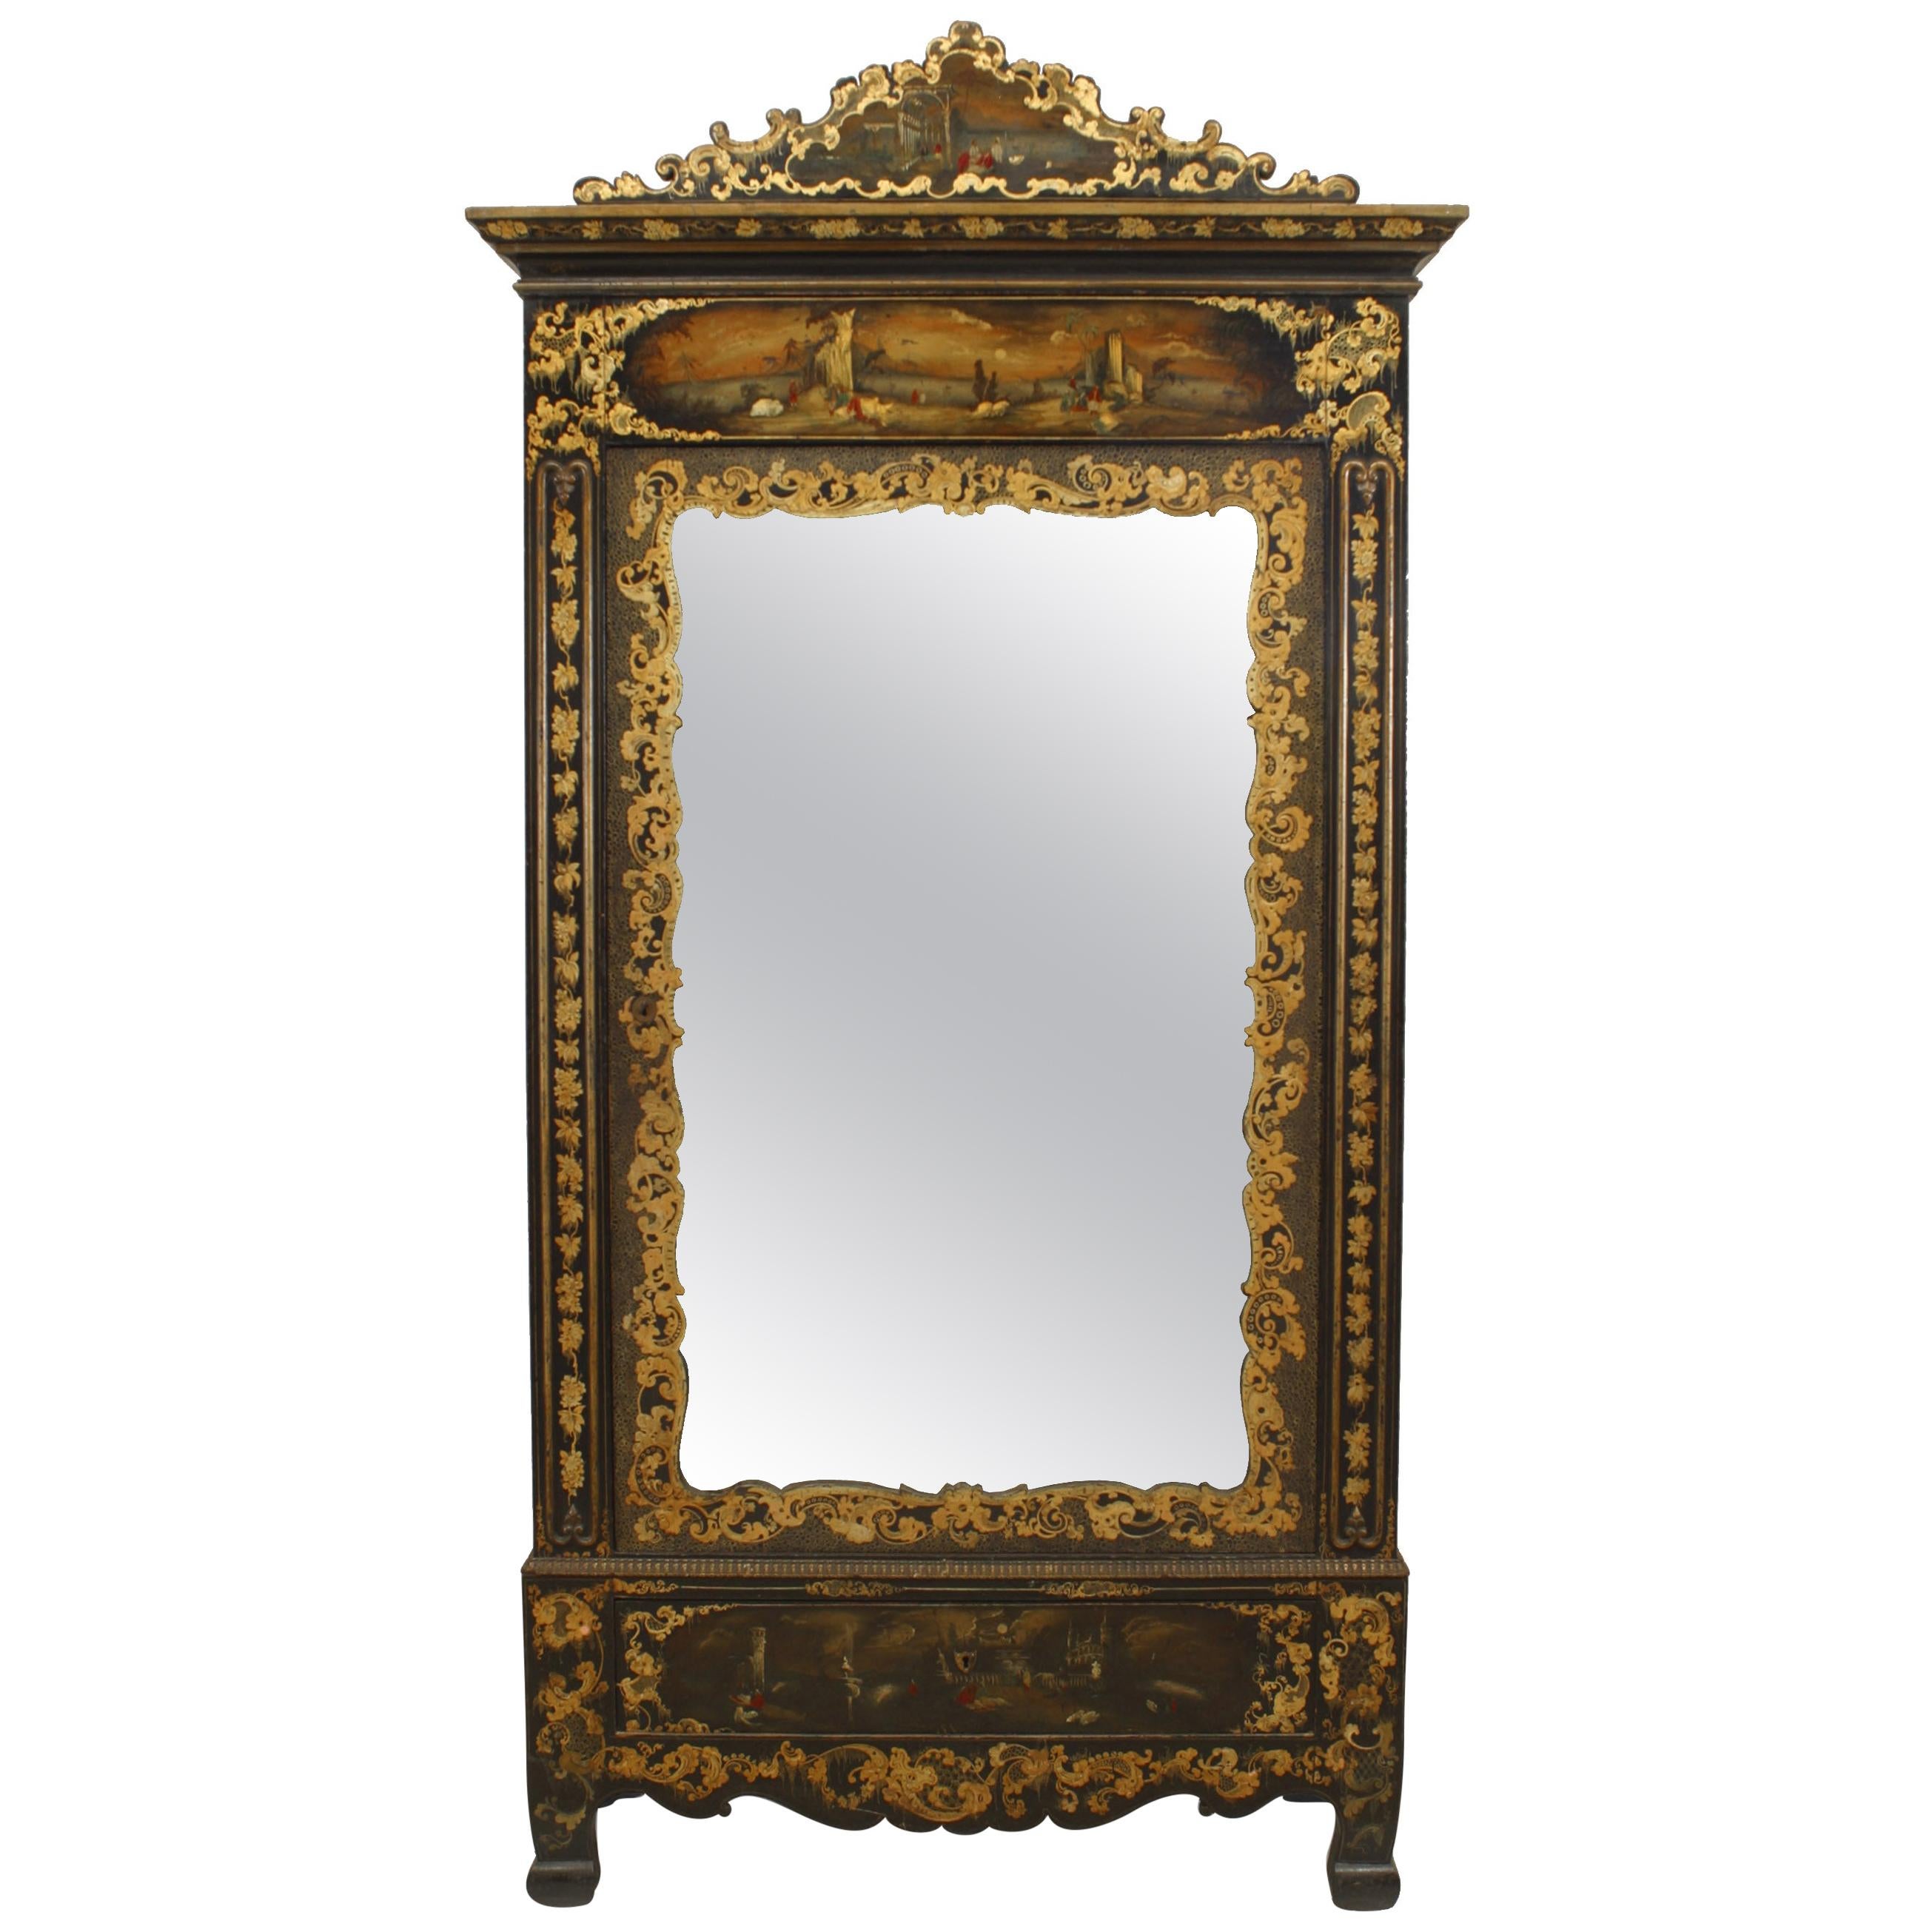 Victorian Black Lacquered Mirrored Armoire with Gilt Embellishments